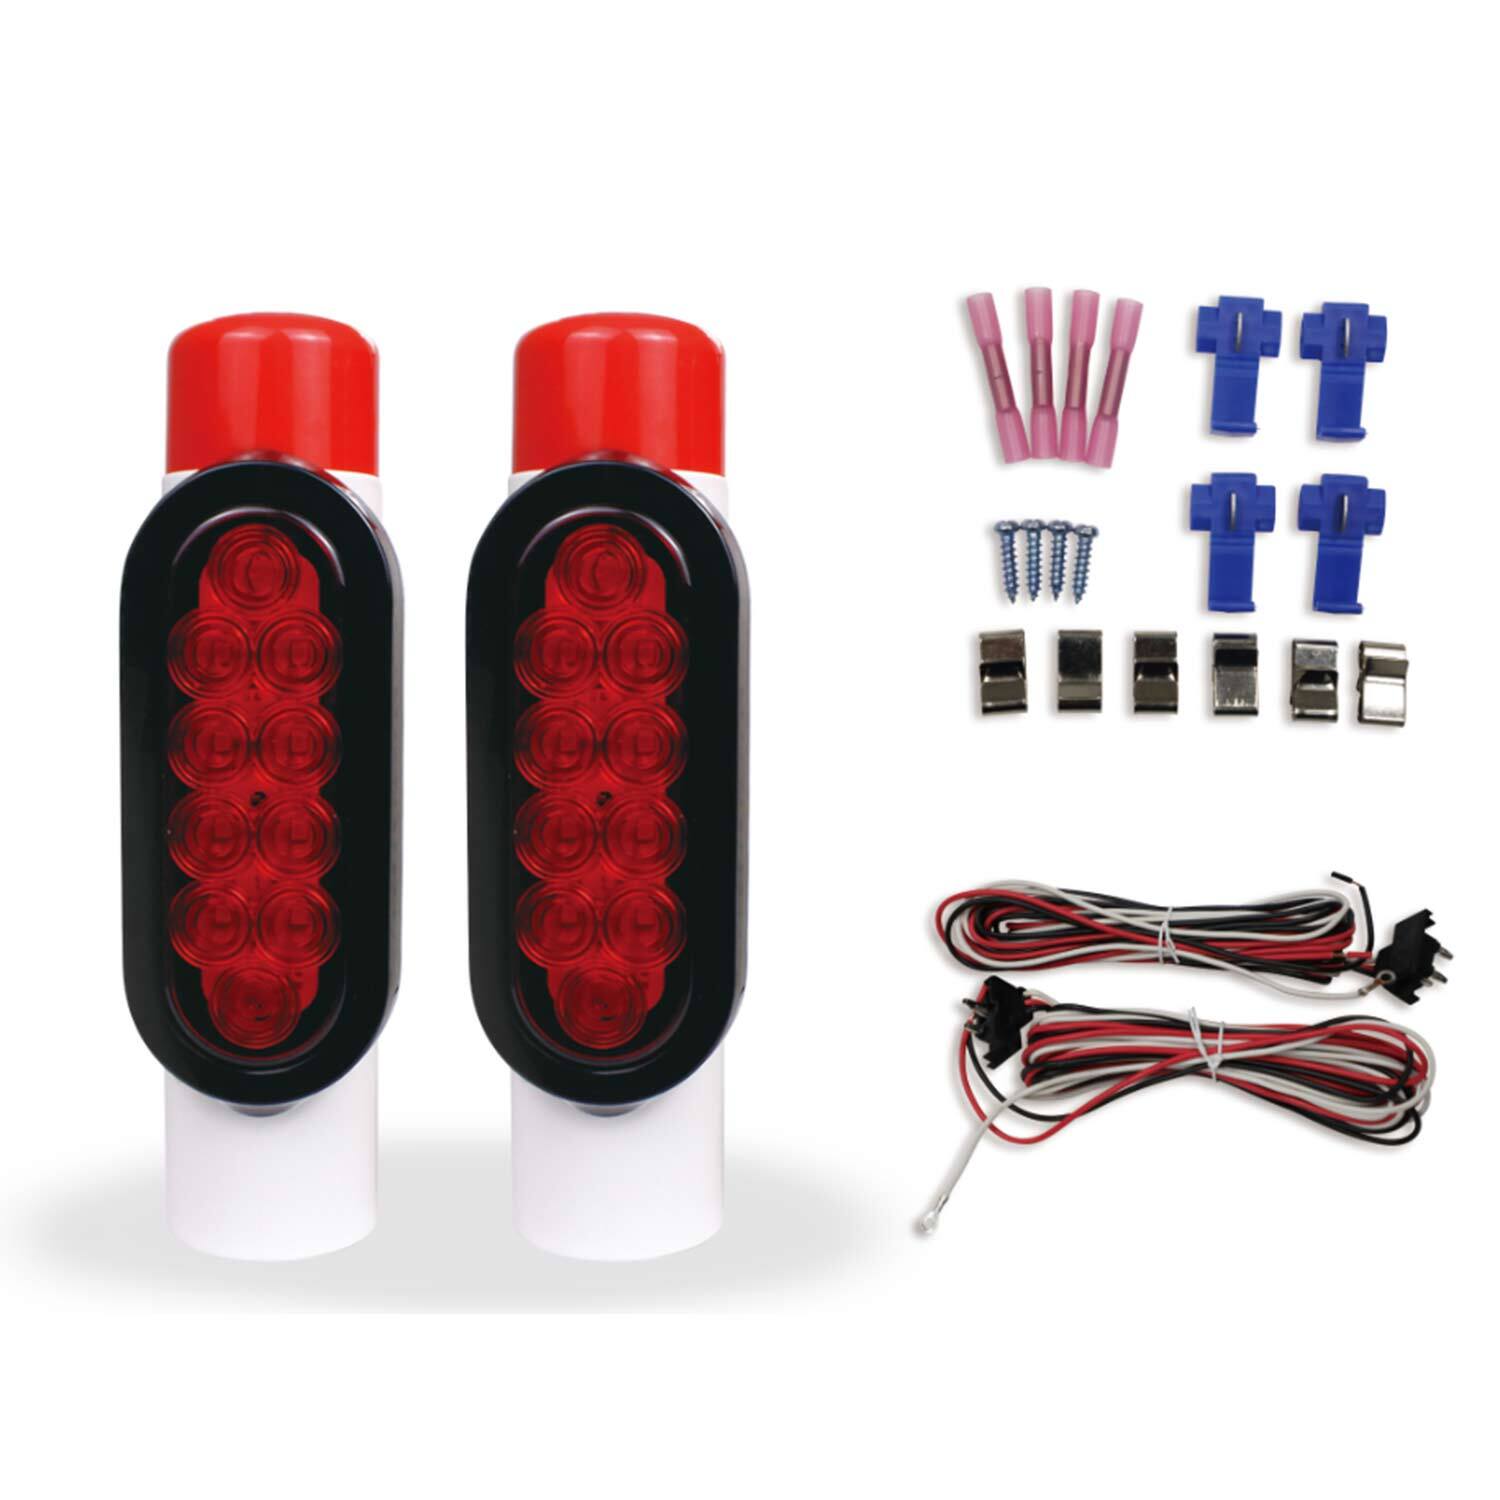 Trailer Guide-On Post Mounted LED Tail Lights West Marine